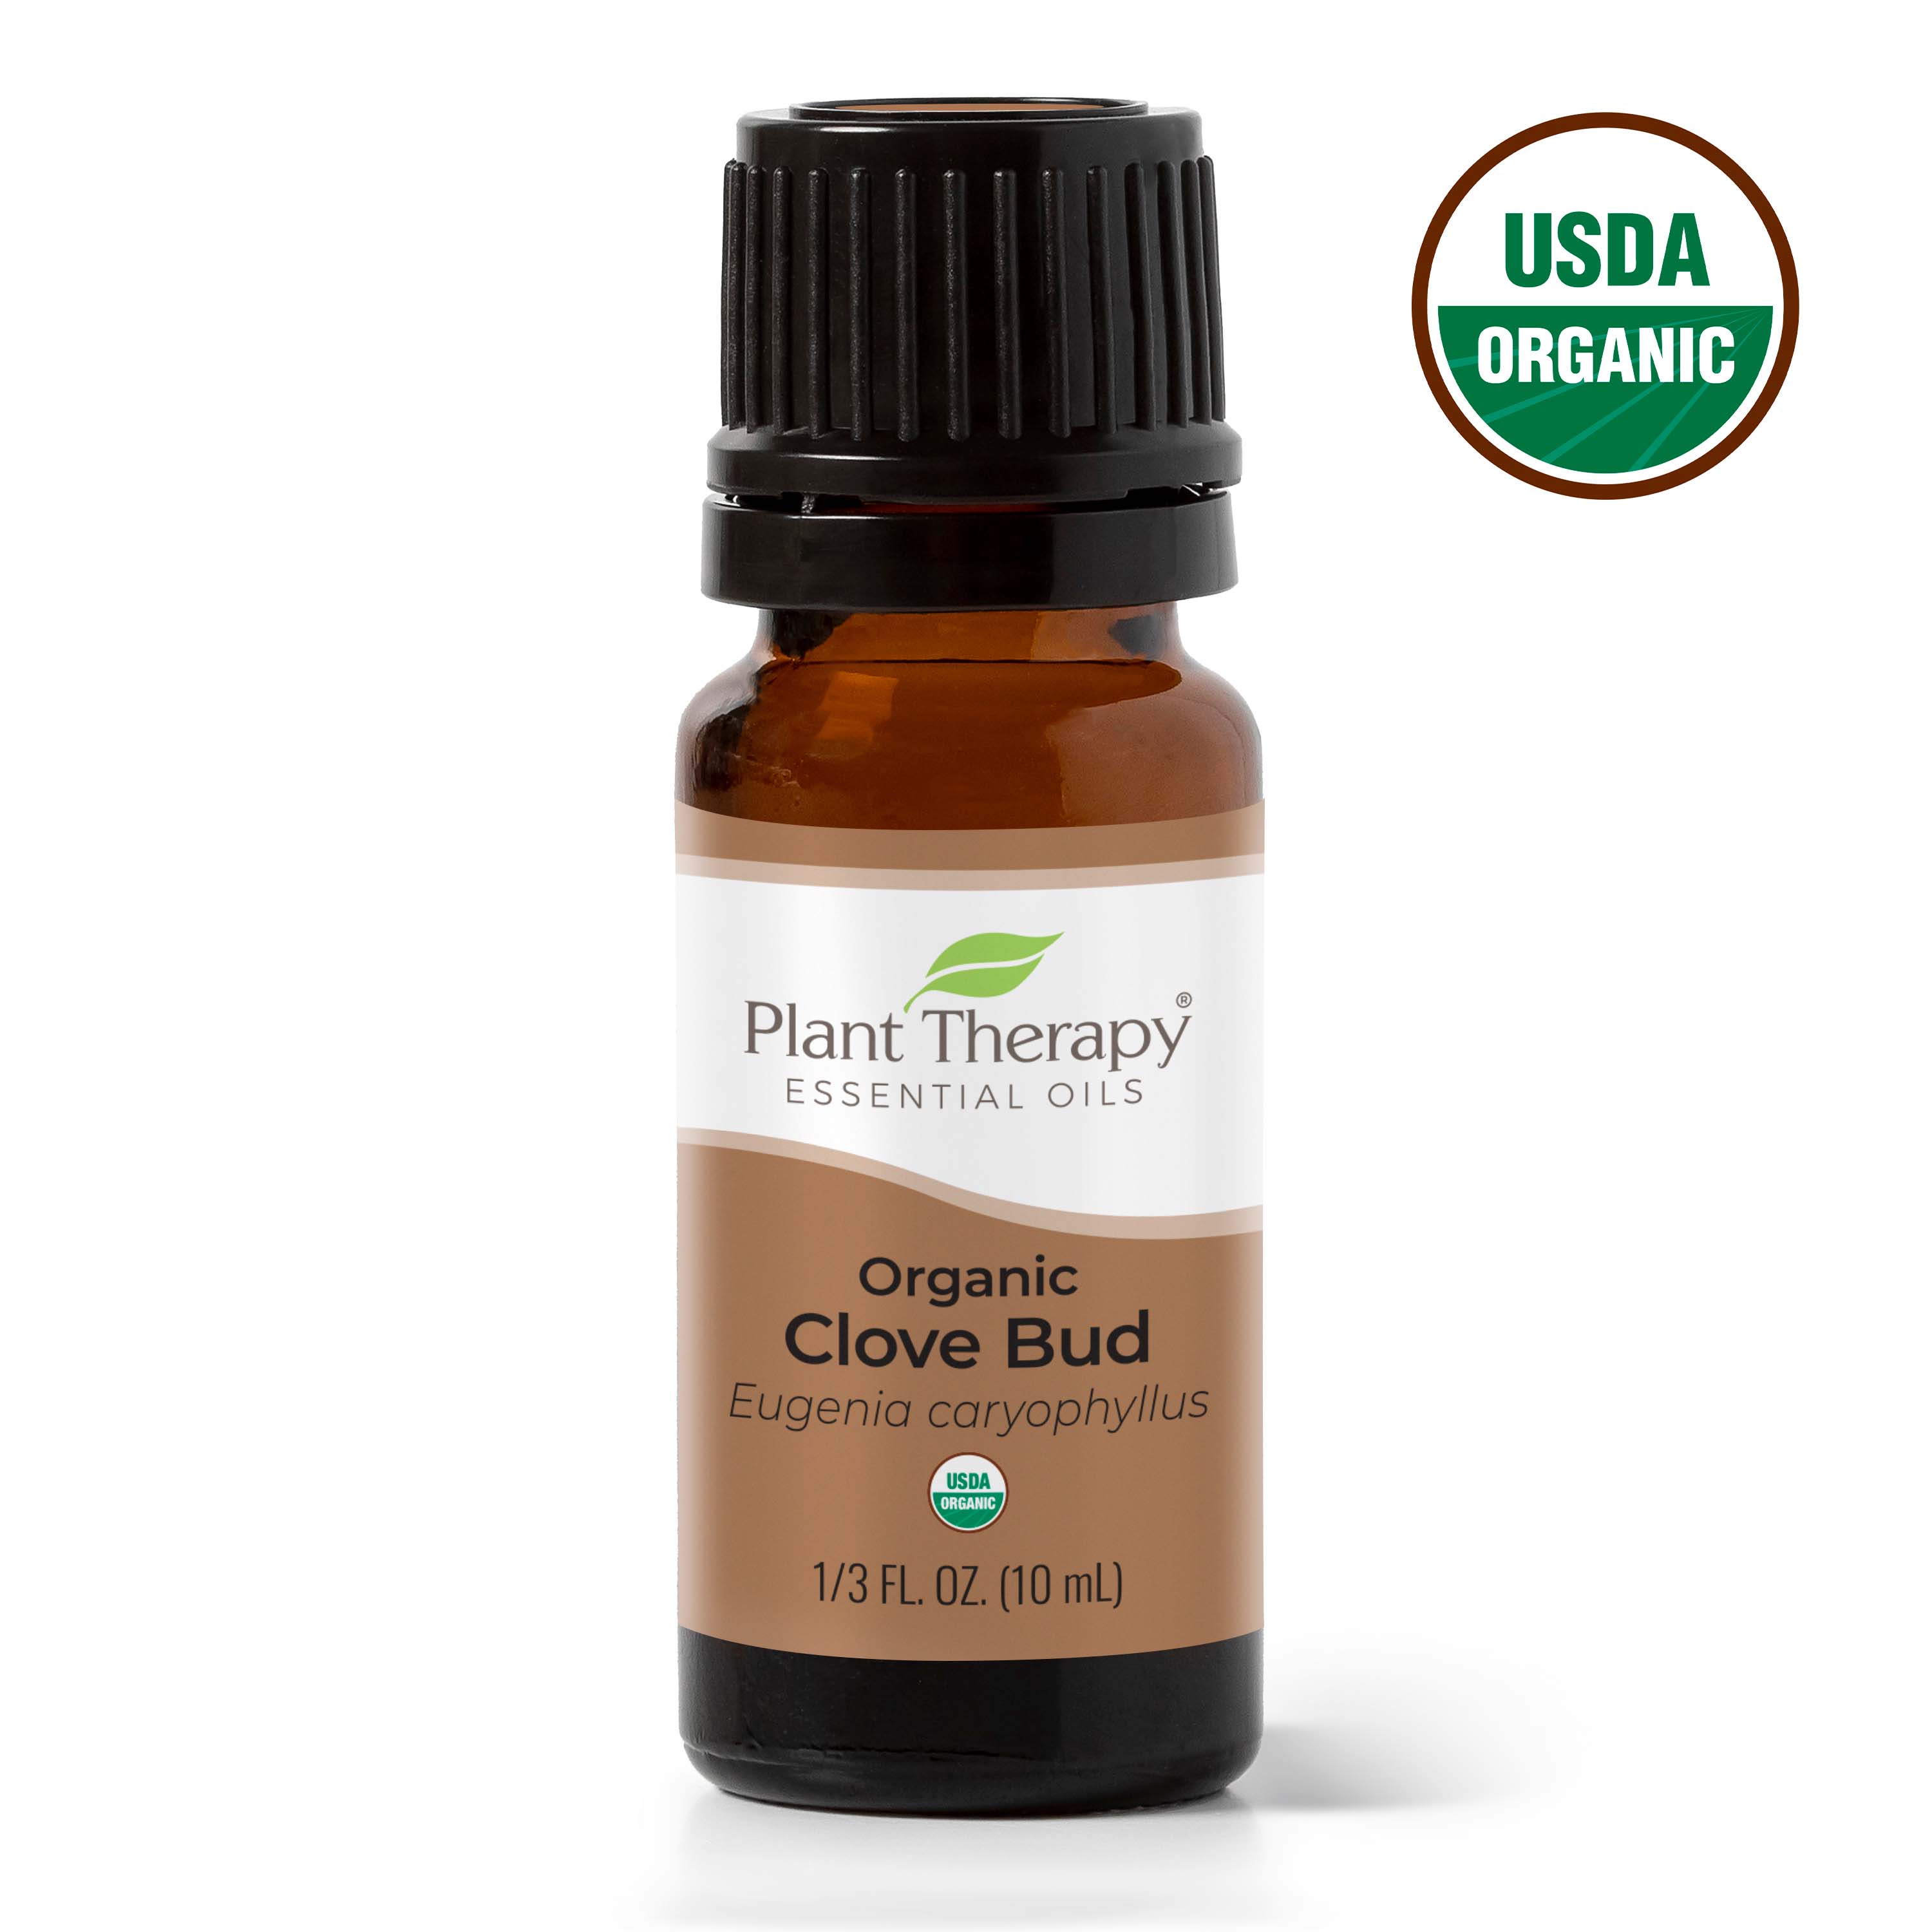 Plant Therapy Clove Bud Organic Essential Oil 100% Pure USDA Certified Organic, Undiluted, Natural Aromatherapy 10mL - image 1 of 7